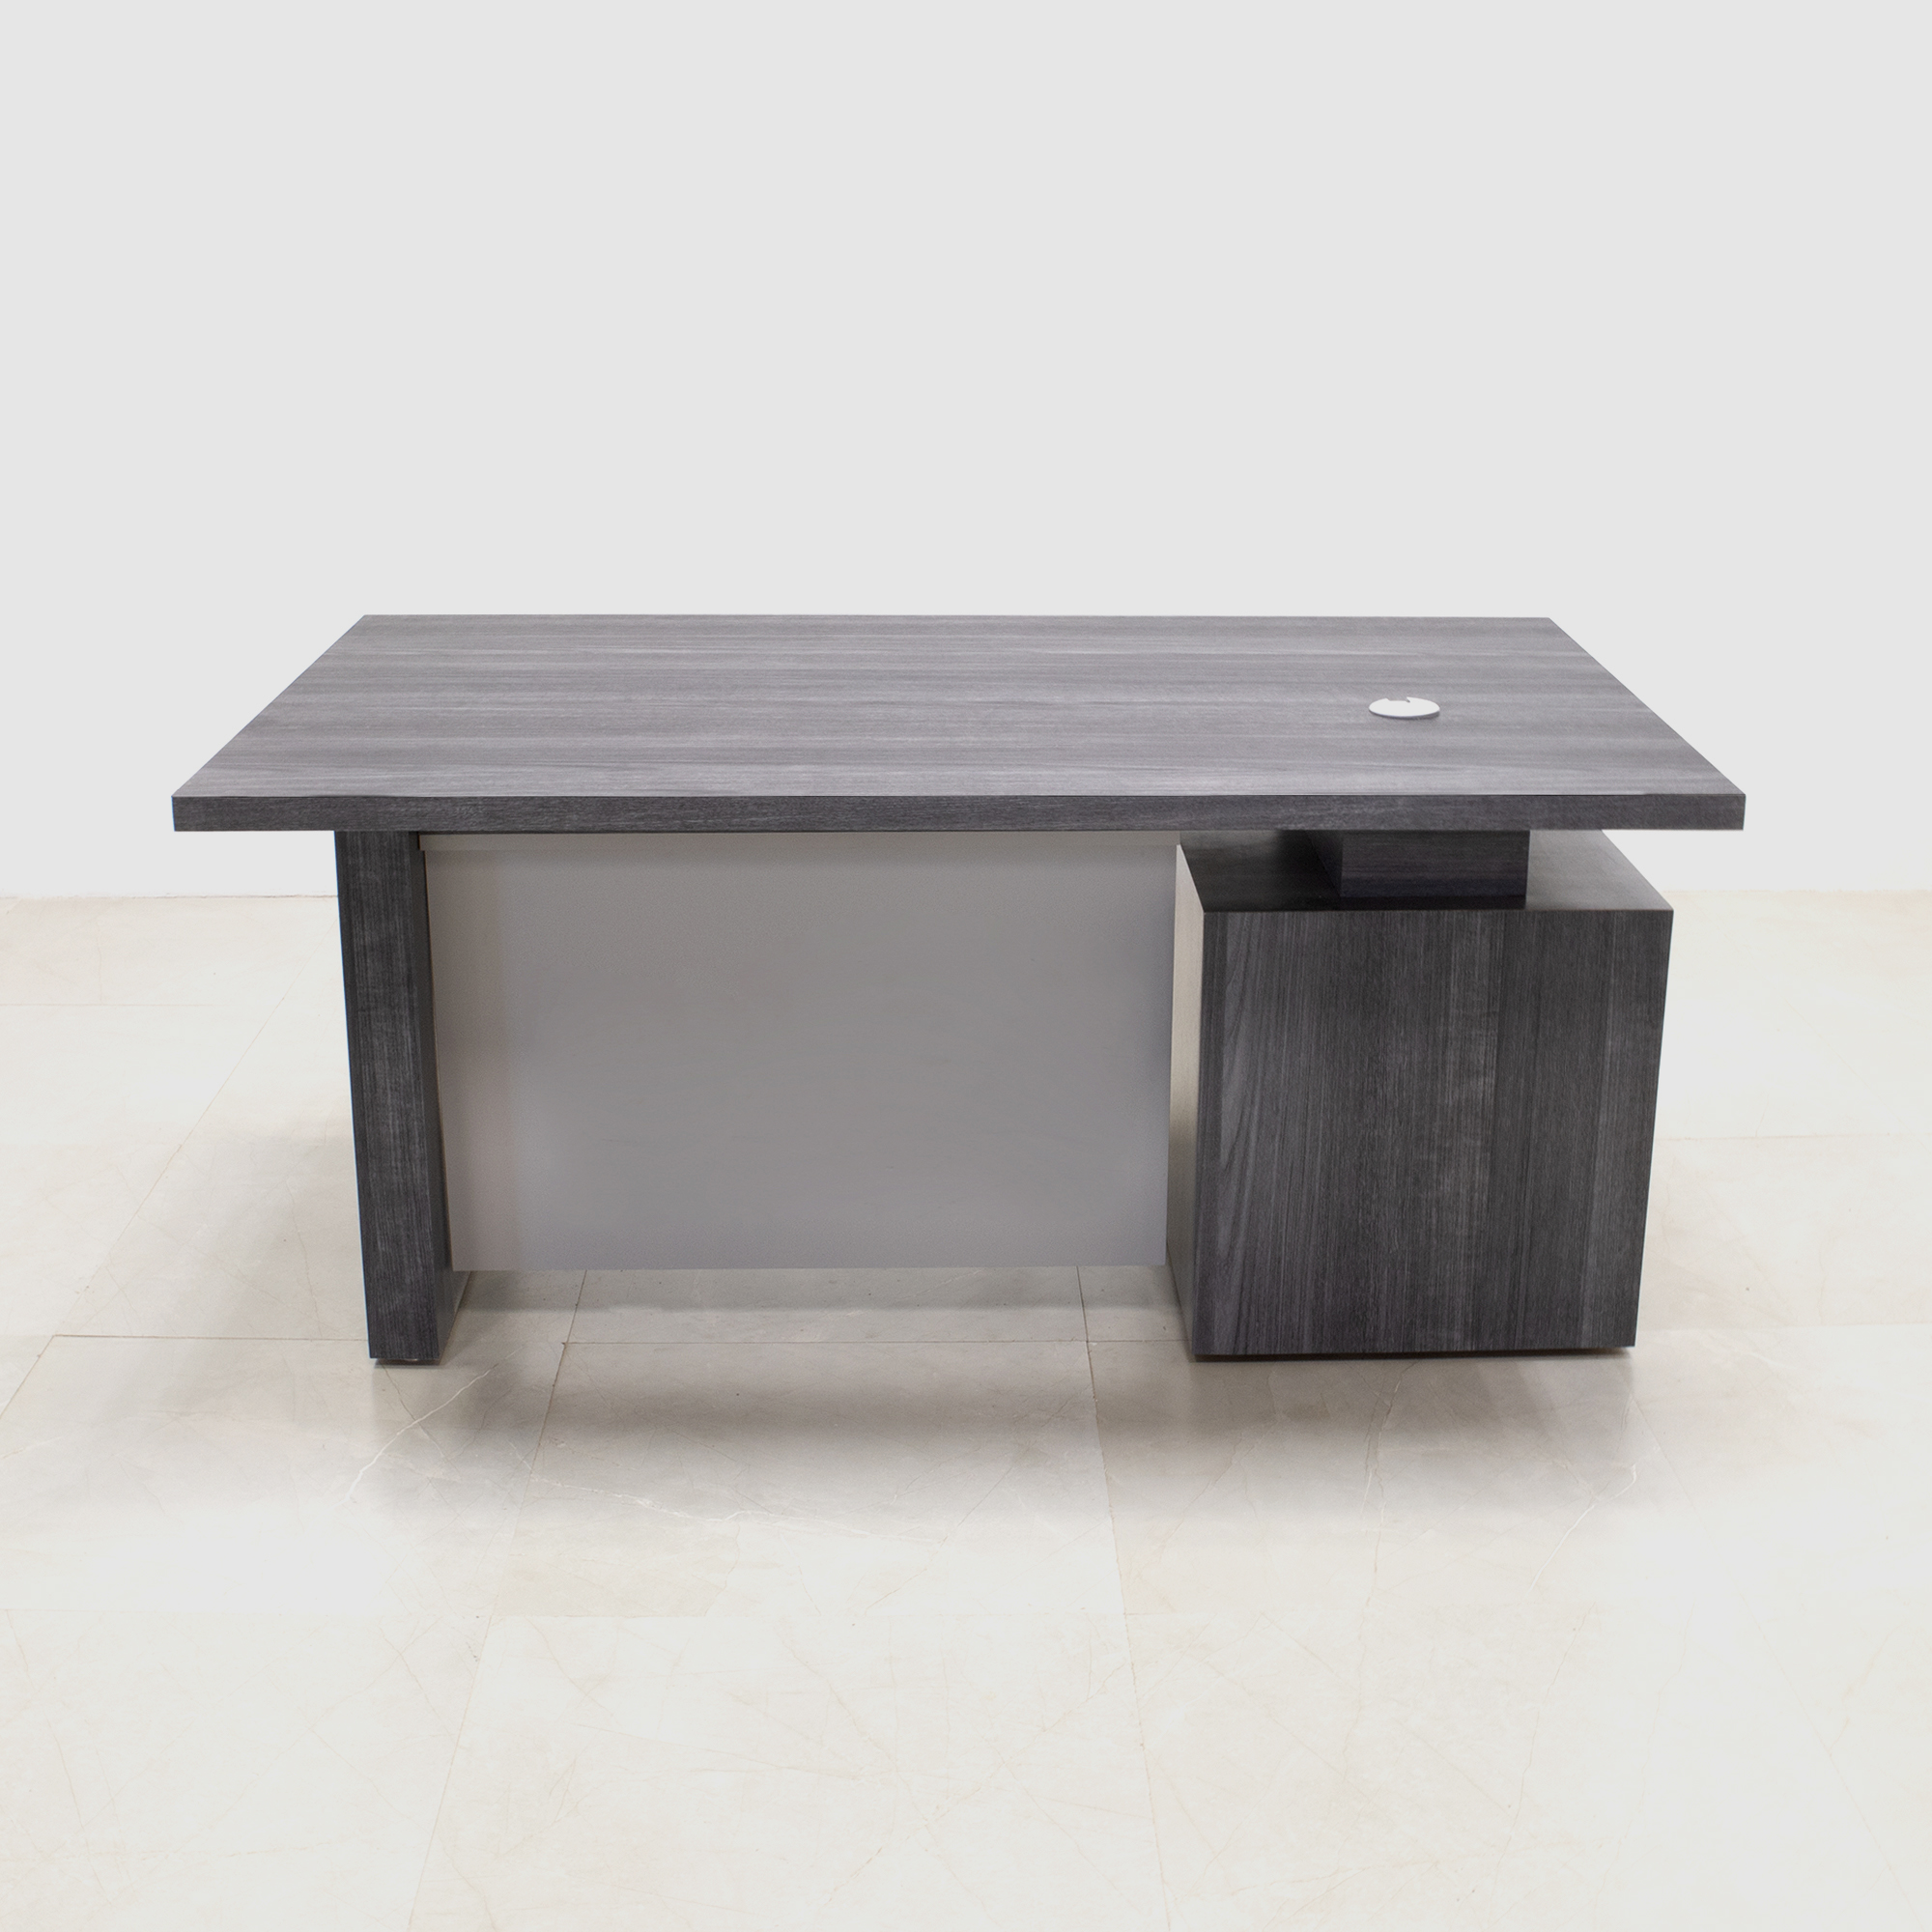 60-inch Avenue Straight Executive Desk in storm teakwood matte laminate top, base & storage, and fog gray matte laminate privacy panel, shown here.